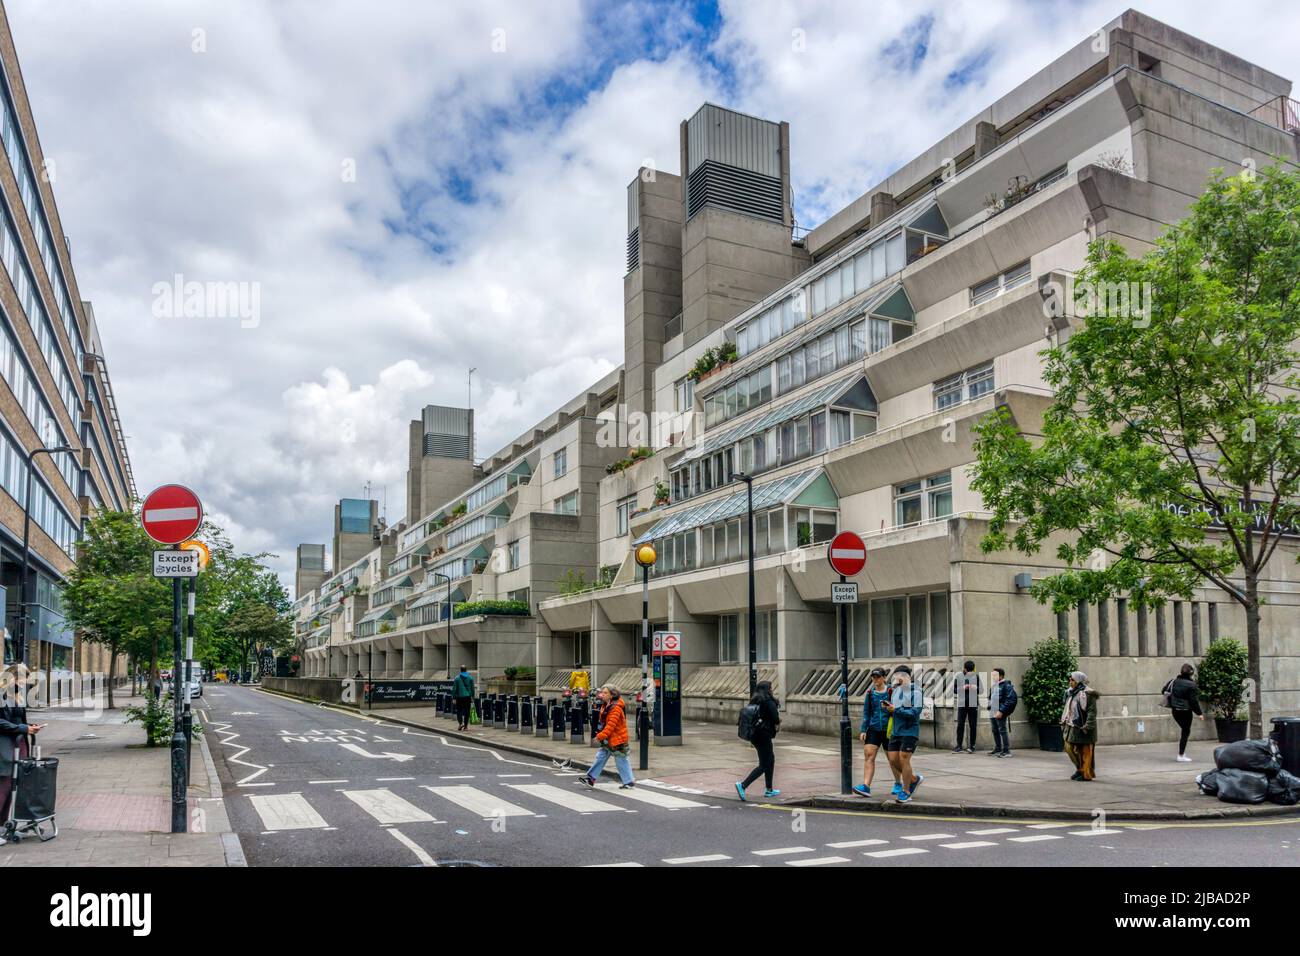 The Grade II listed Brunswick Centre residential and shopping centre in Bloomsbury, London, was designed by Patrick Hodgkinson in the mid-1960s. Stock Photo